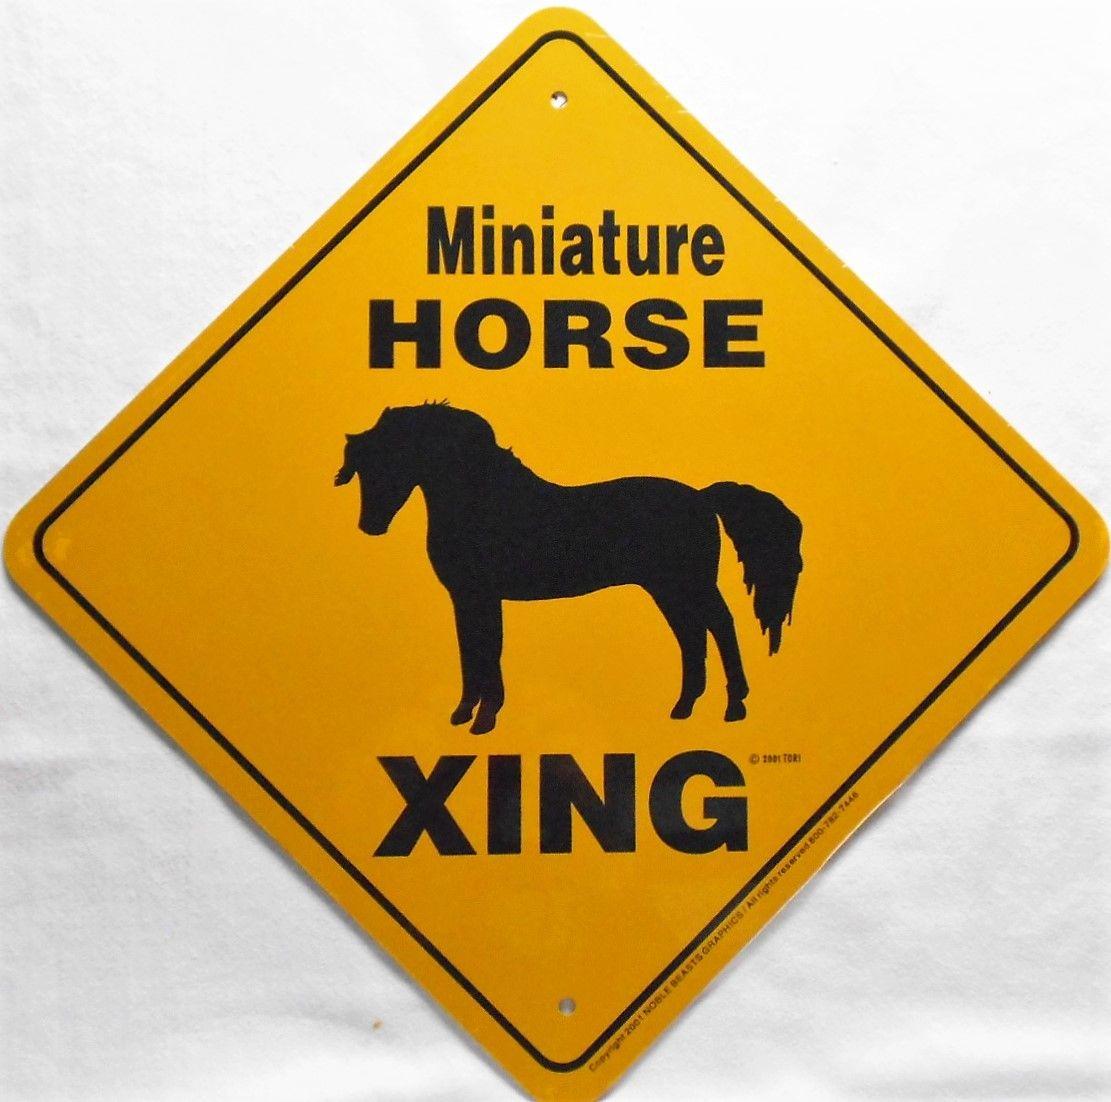 Black and Yellow Horse Logo - Miniature Horse Xing / 12